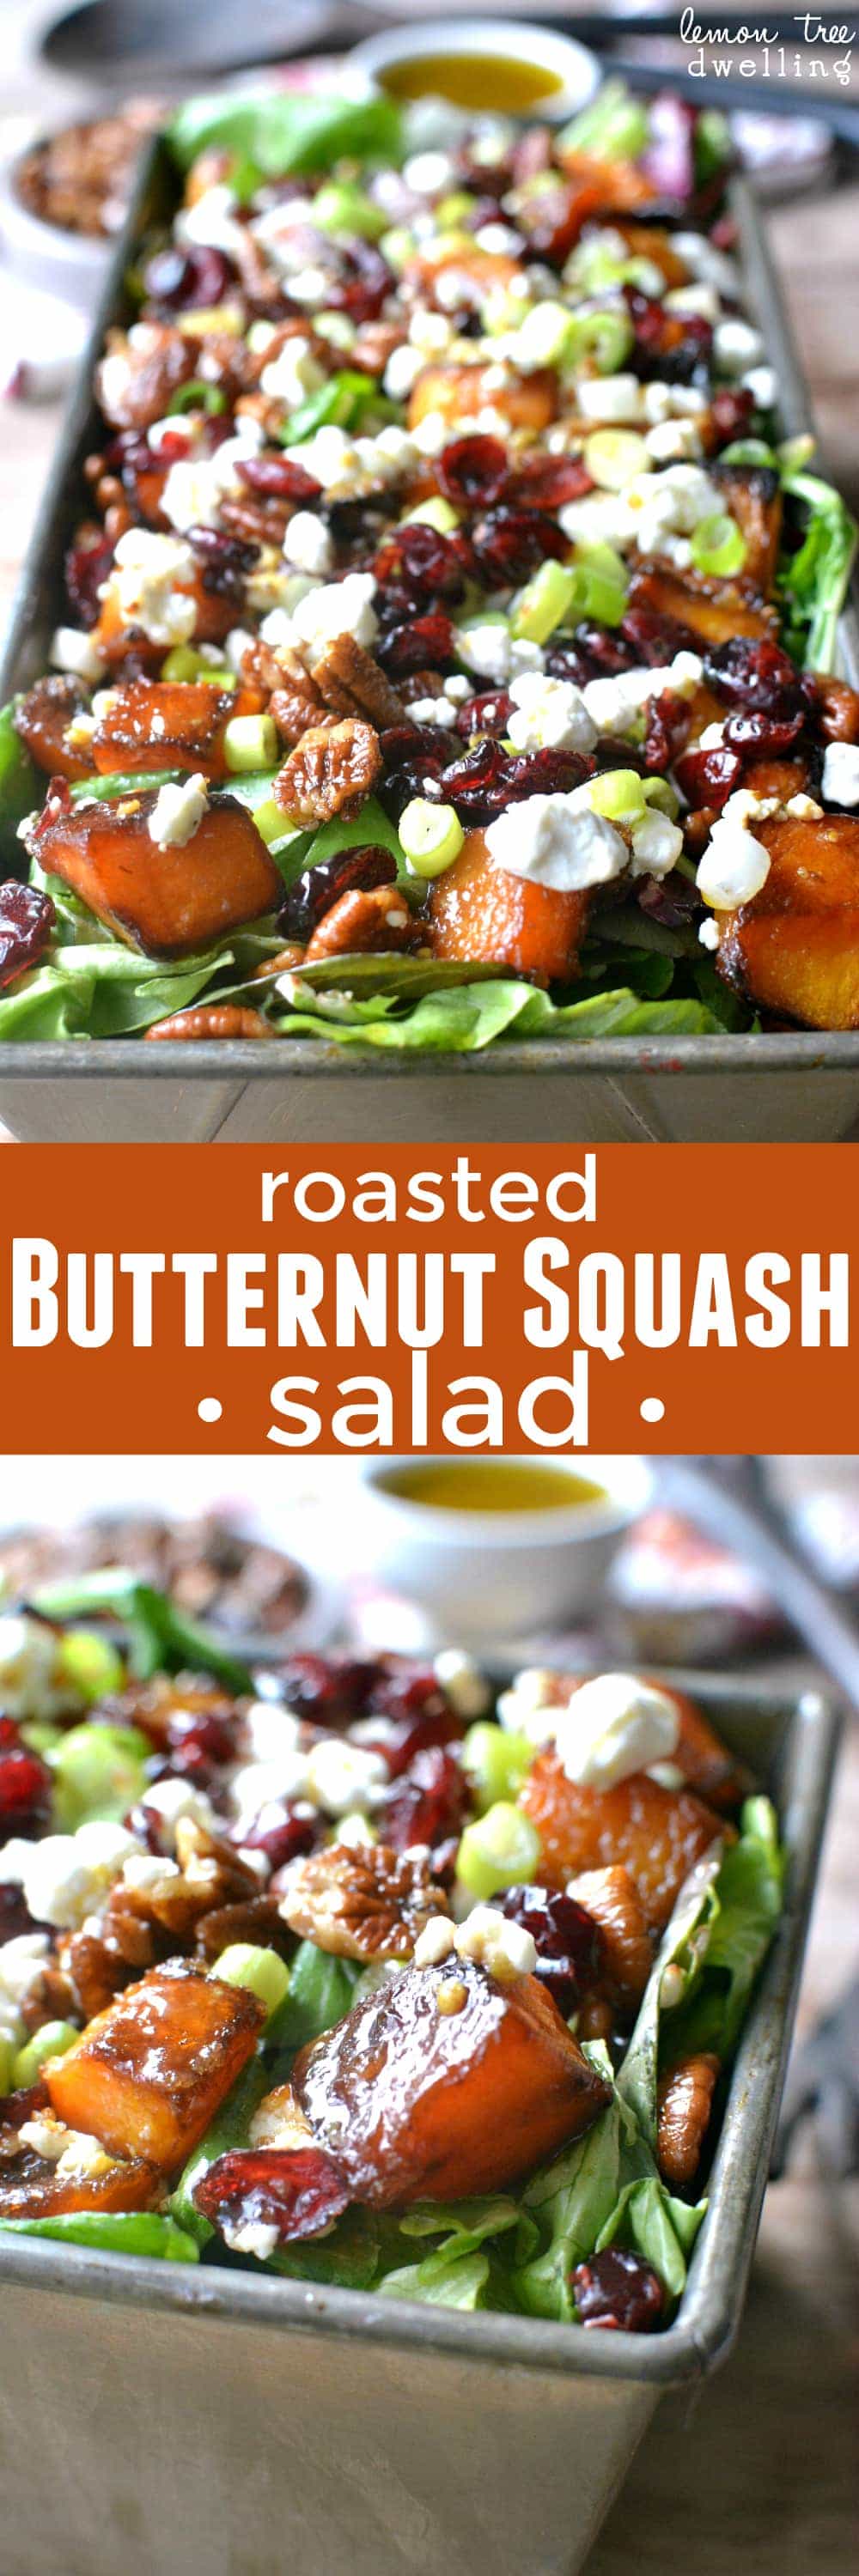  Mixed greens topped with roasted butternut squash, pecans, dried cranberries, goat cheese, and maple mustard vinaigrette. The BEST Thanksgiving salad!!